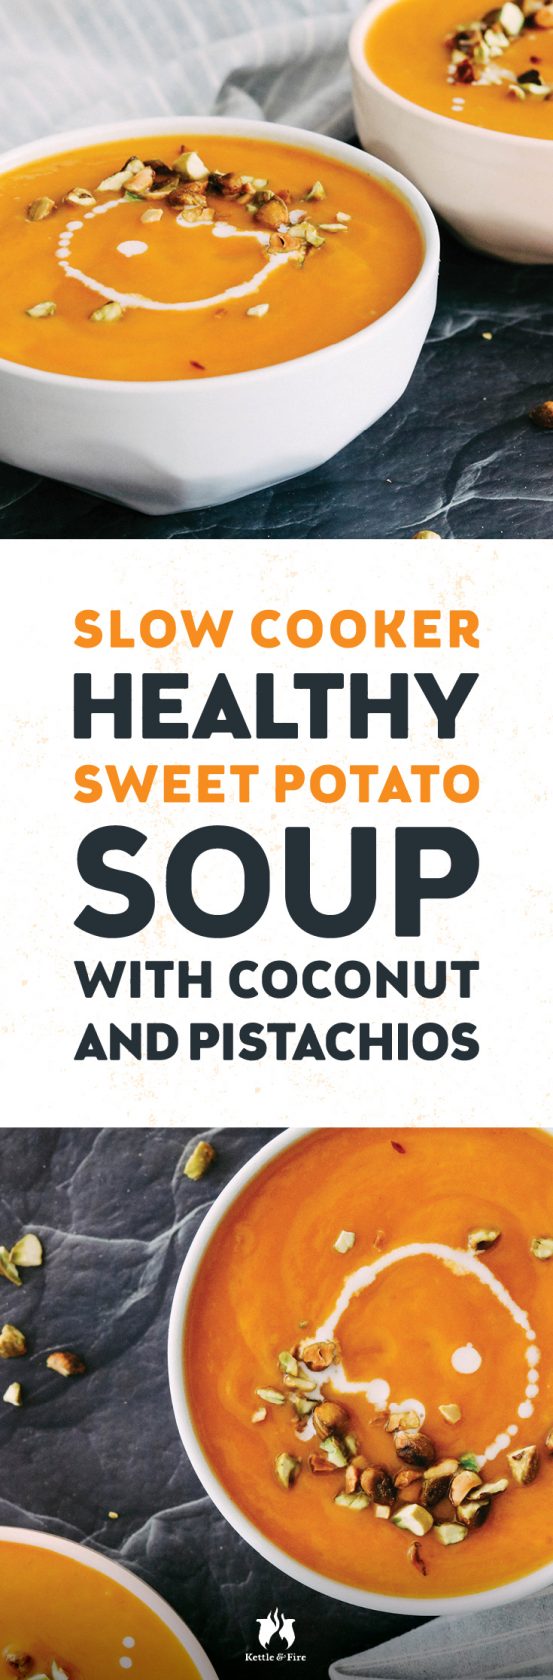 With only 10 ingredients and one cooking vessel, this healthy sweet potato soup with coconut and pistachio will amaze you—it is creamy, quick and delicious!